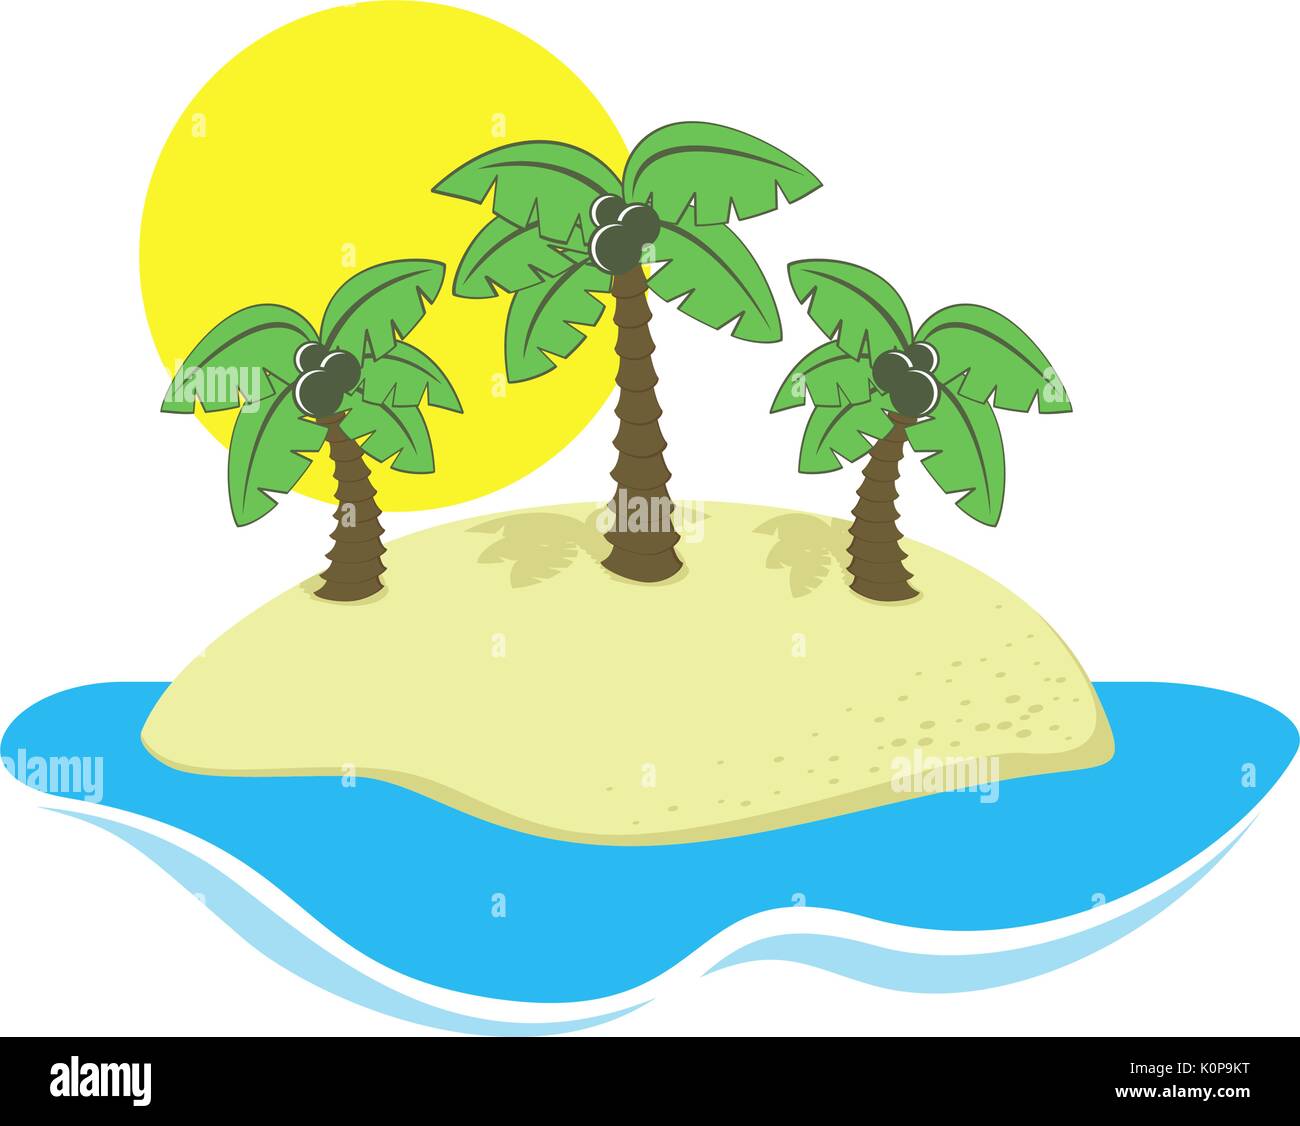 cartoon illustration of tropical island isolated on white, in vector format very easy to edit Stock Vector